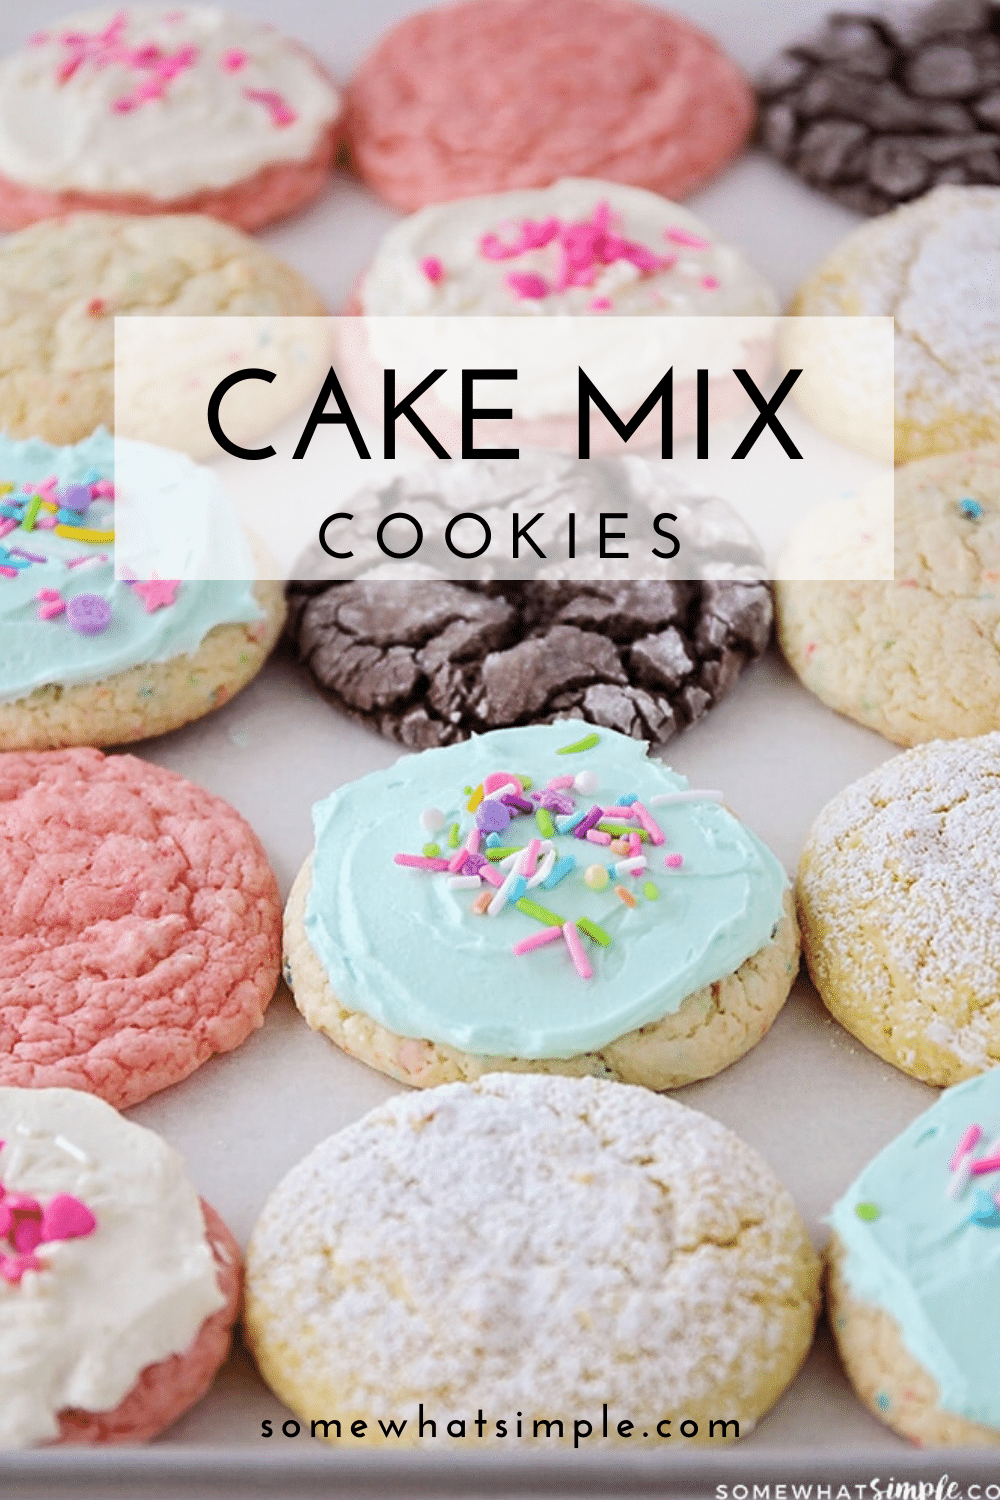 Chocolate Cake Mix Crinkle Cookies Recipe - These Old Cookbooks